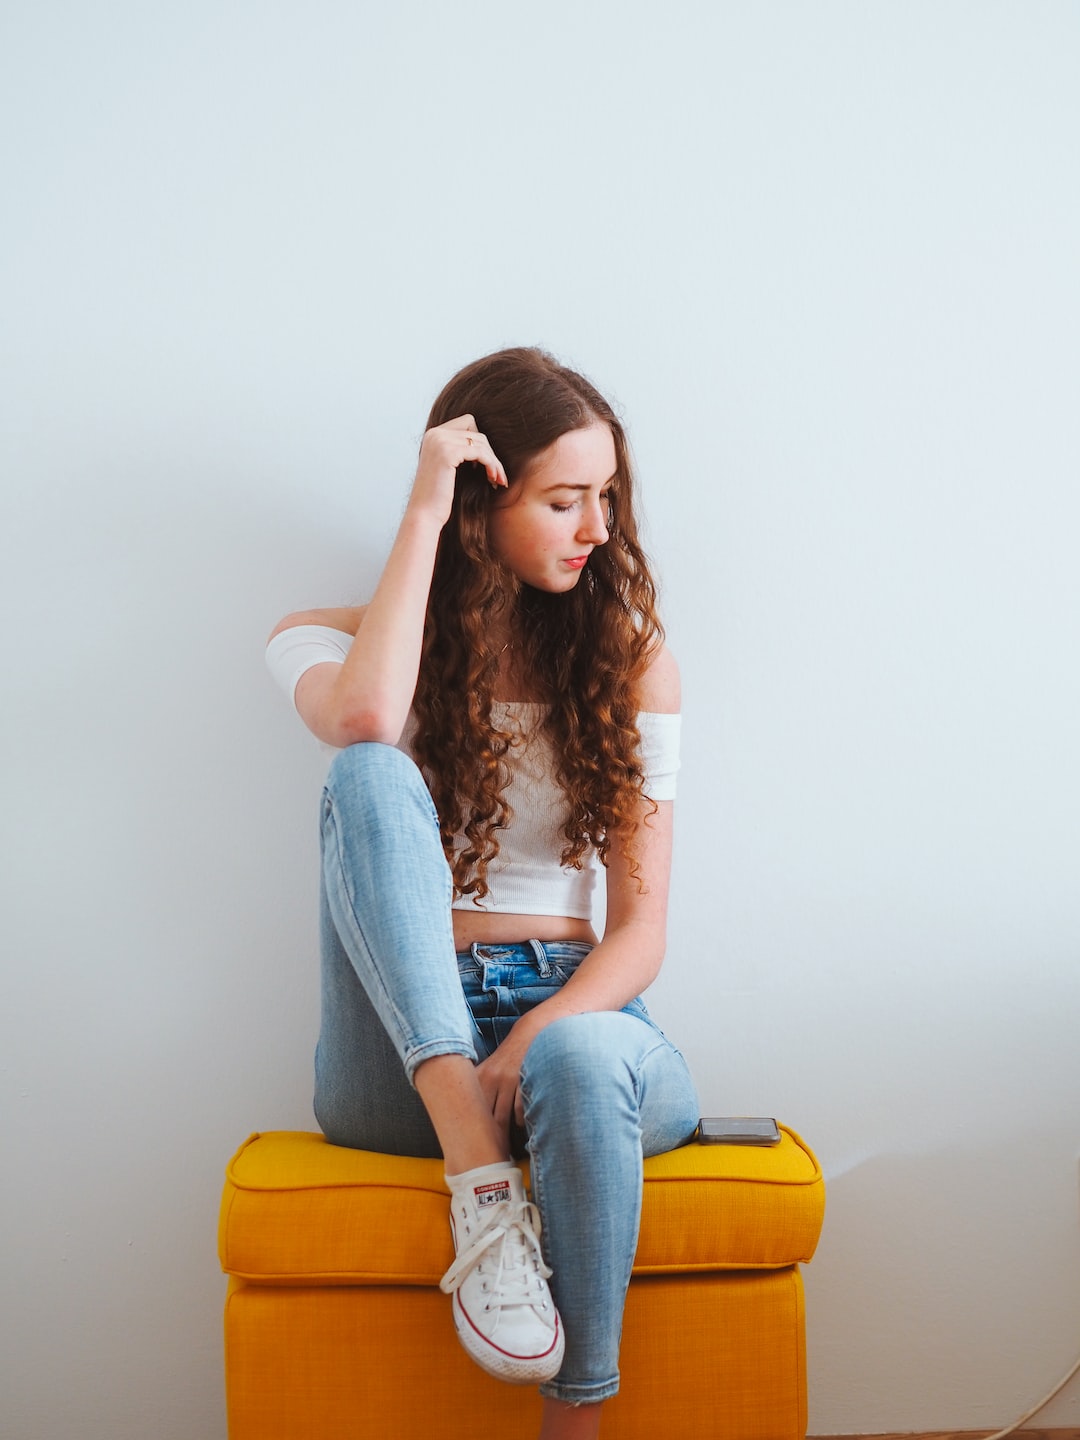 woman in blue denim jeans sitting on yellow chair